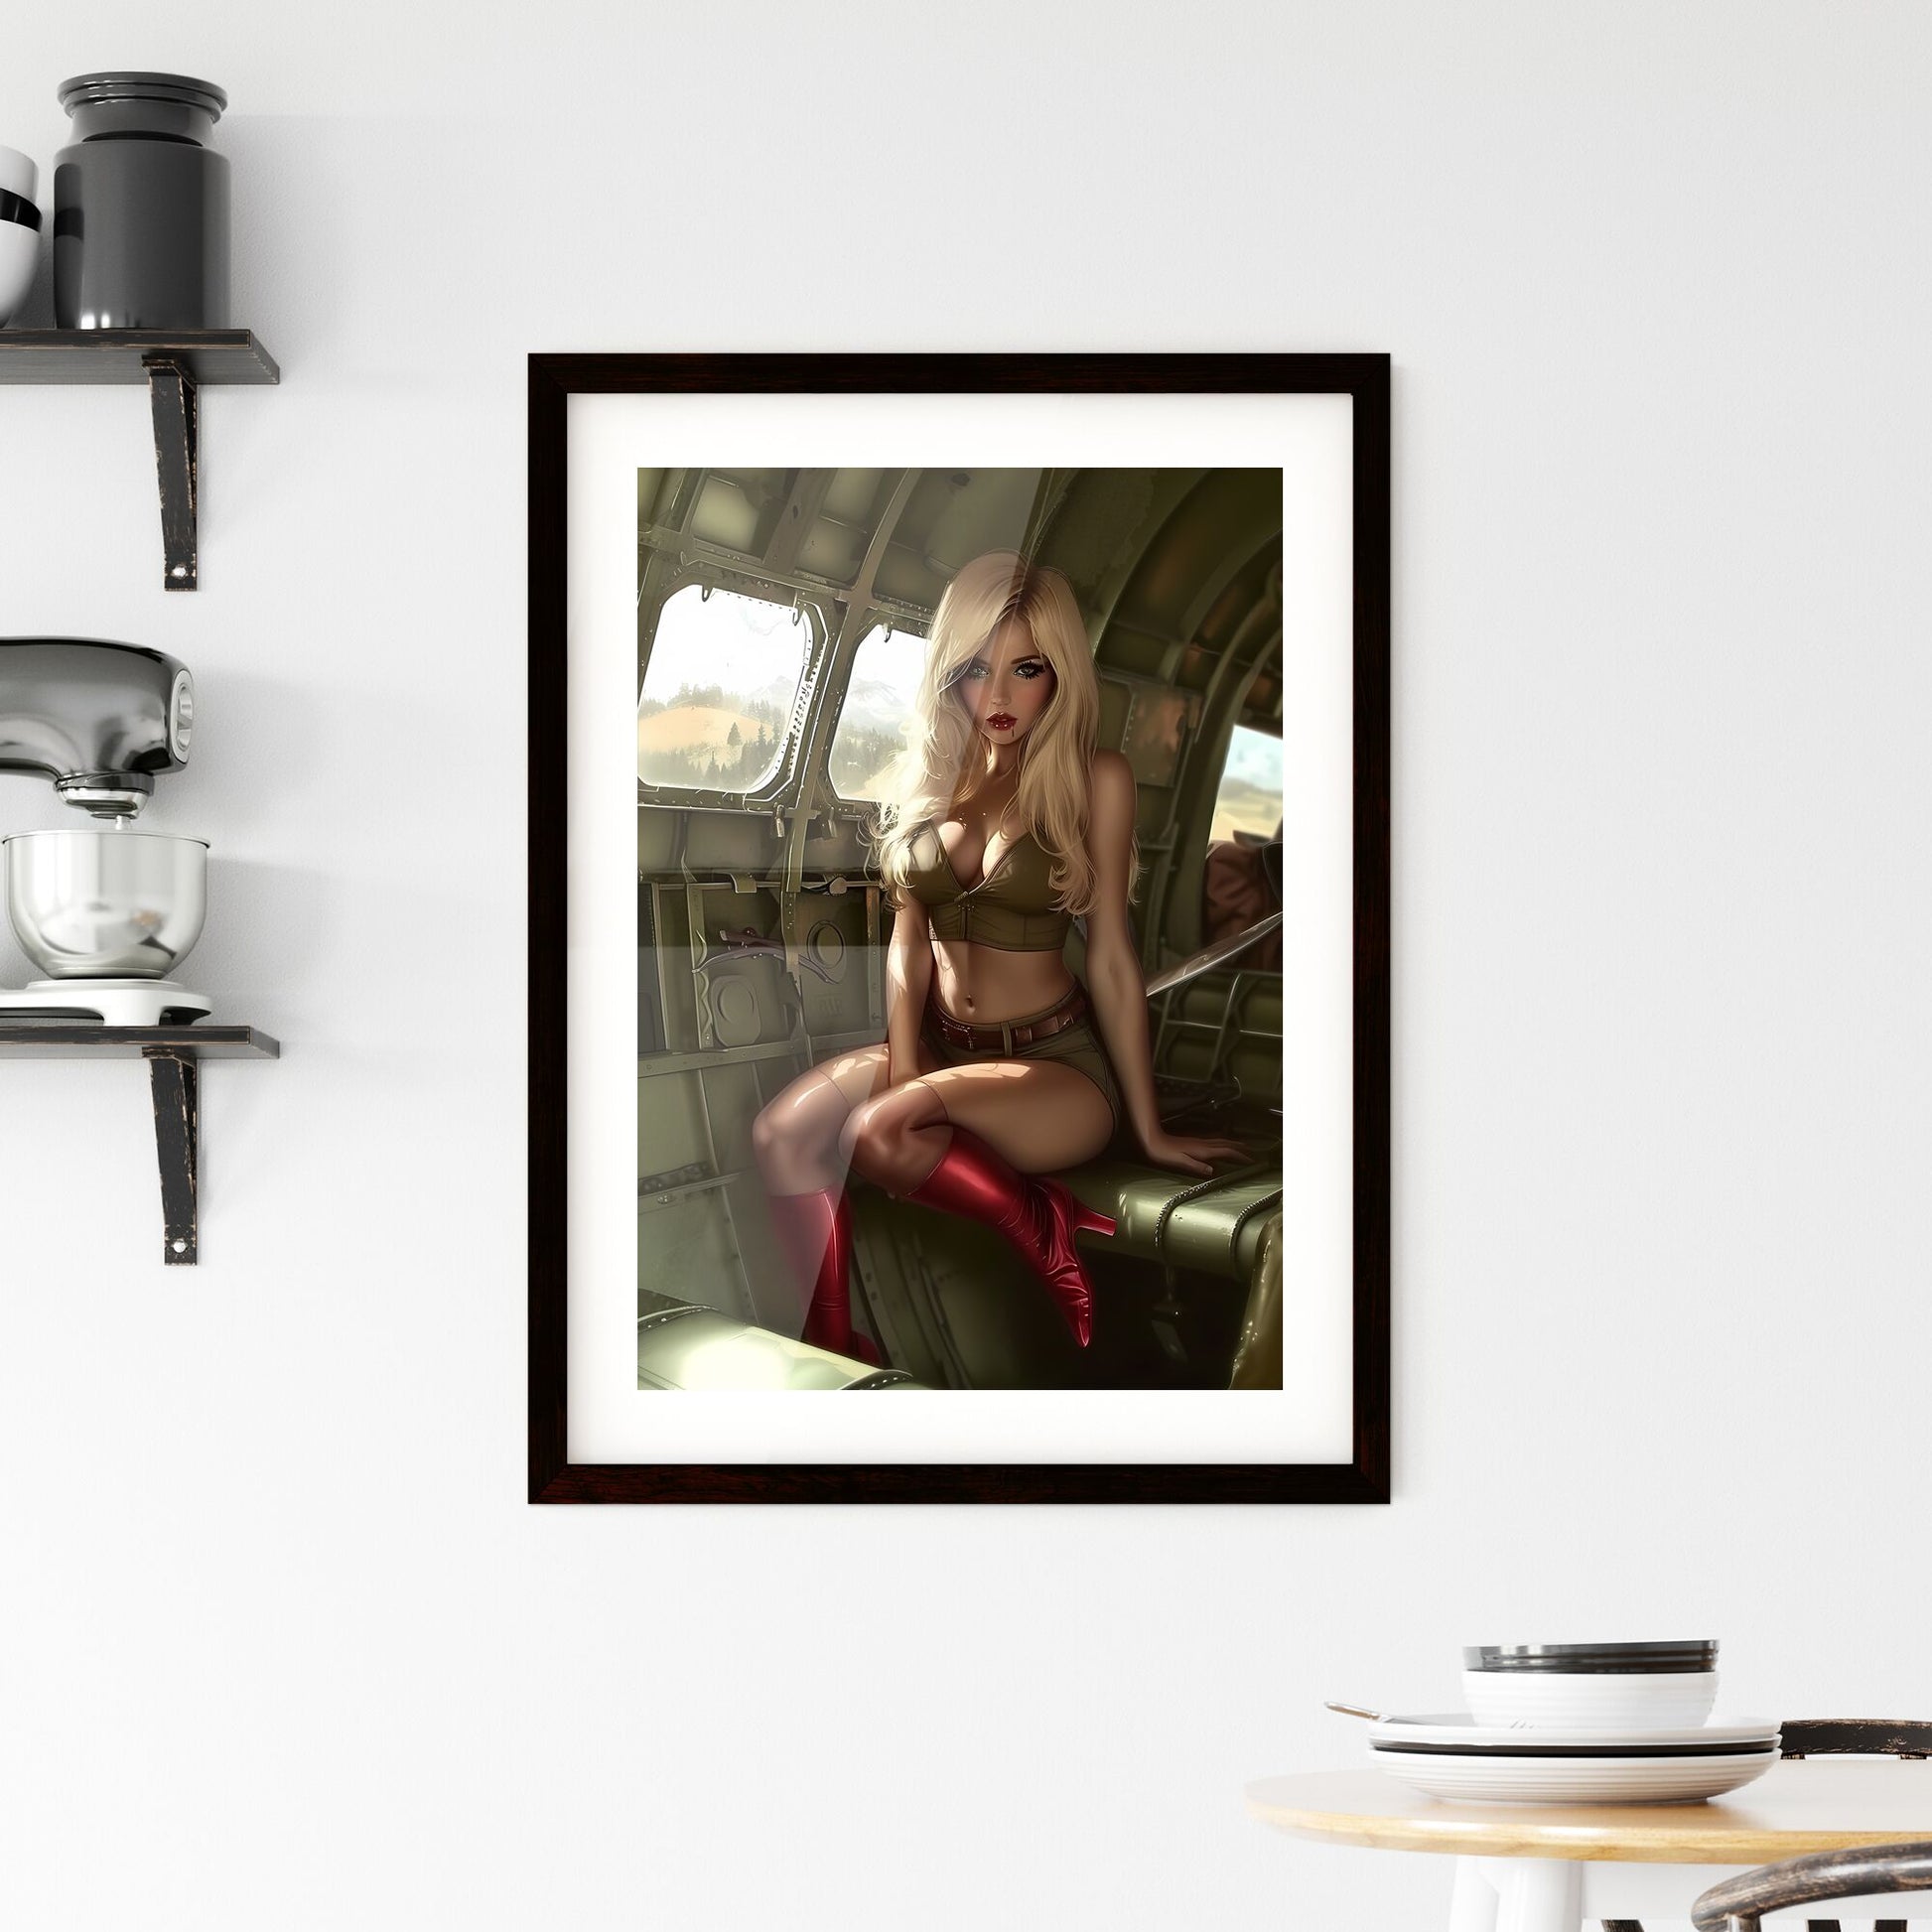 Blonde pin up girl in stockings with red high heels aviation style - Art print of a woman in a military uniform sitting on a green plane Default Title